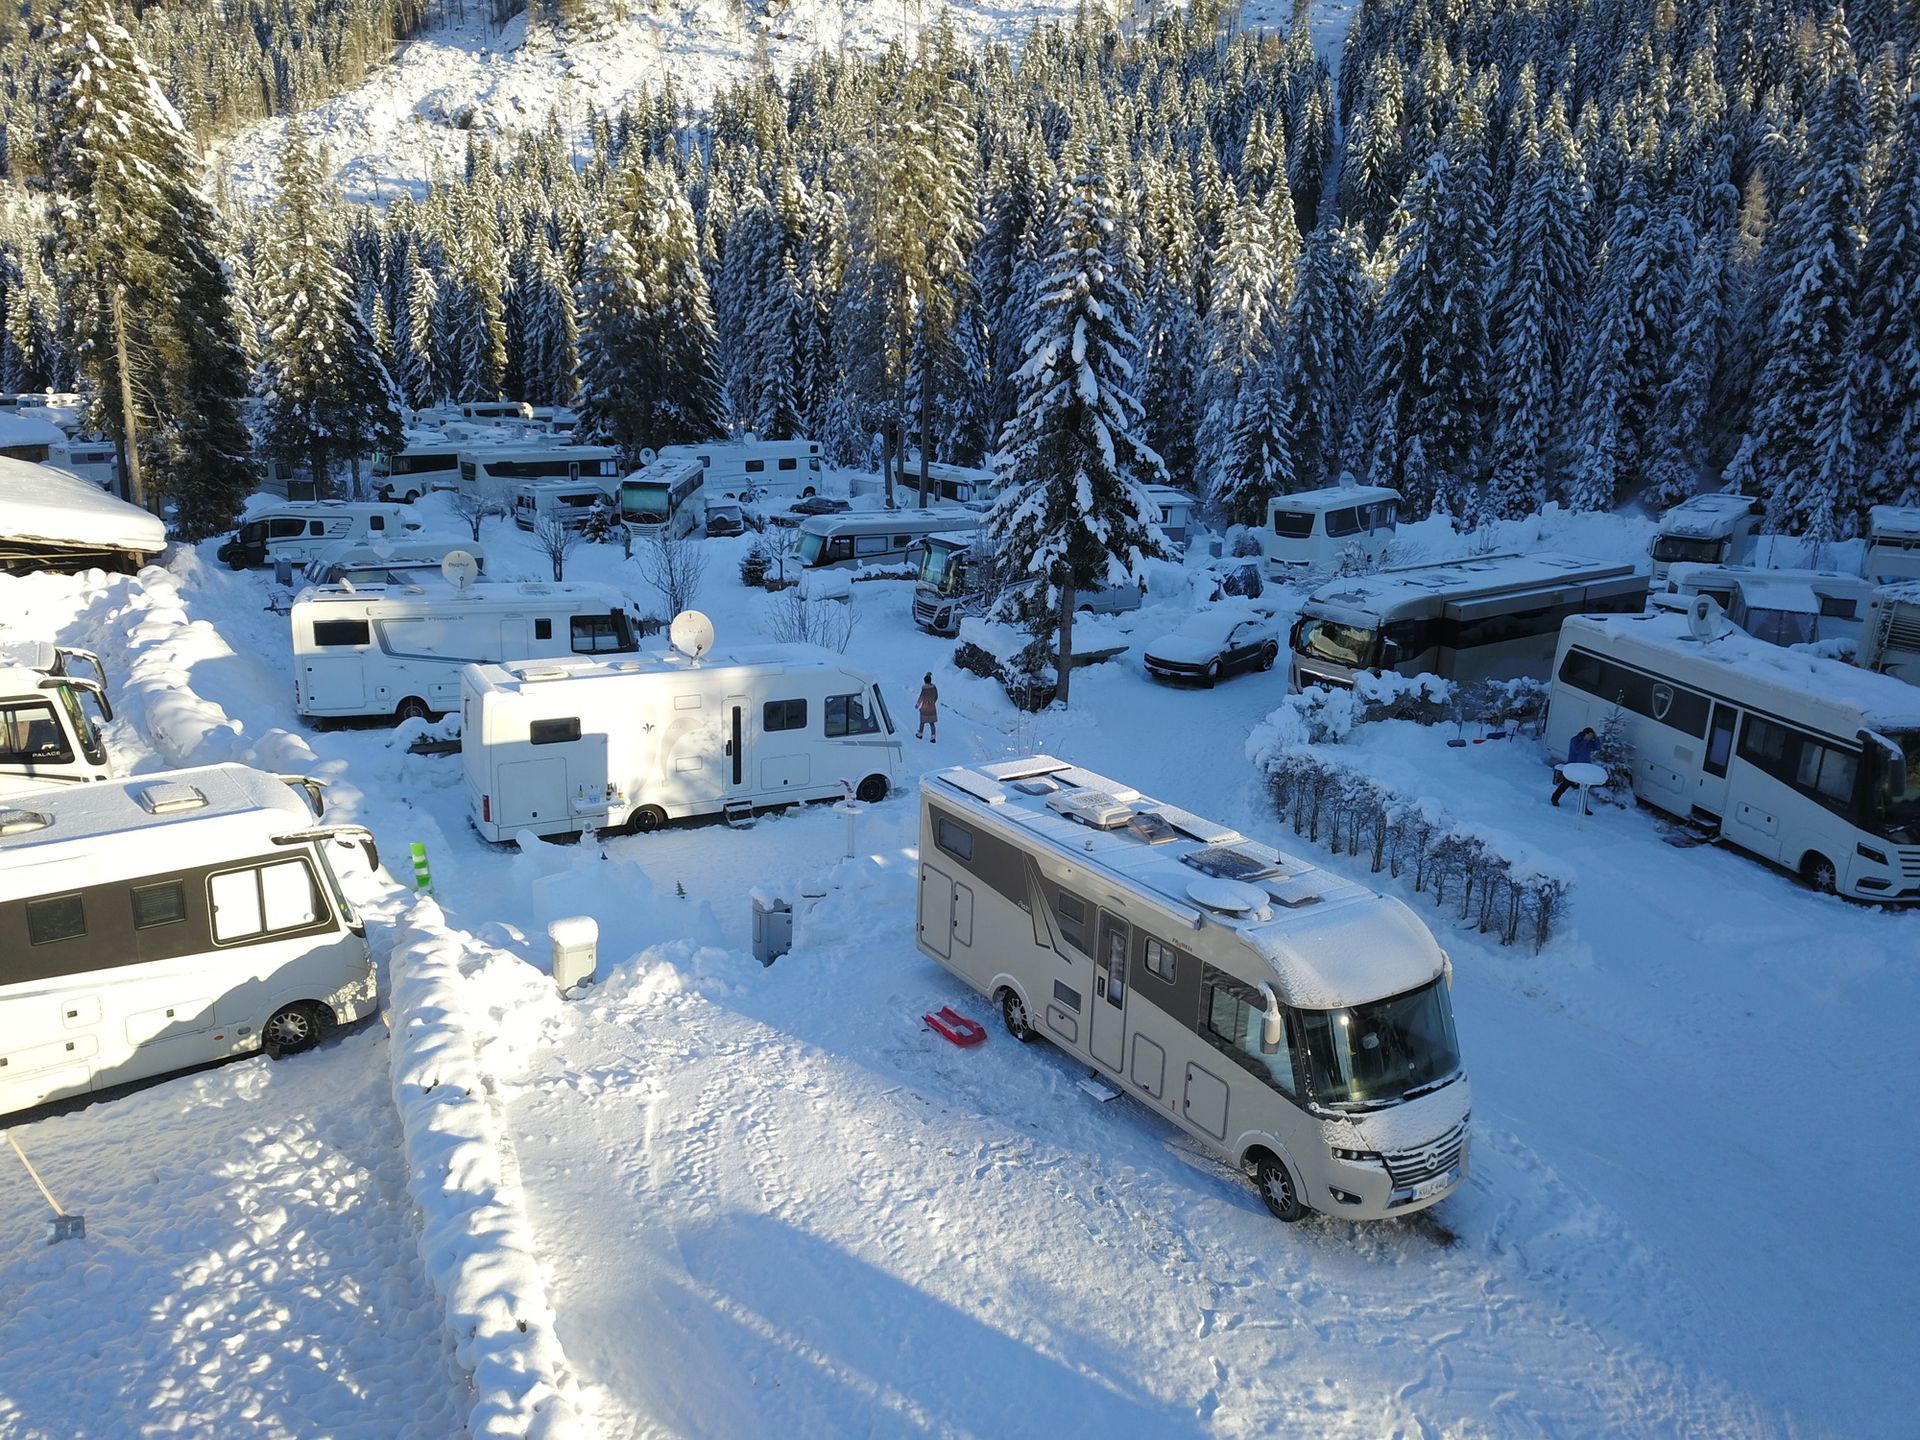 Winter caravanning guide for beginners – main image